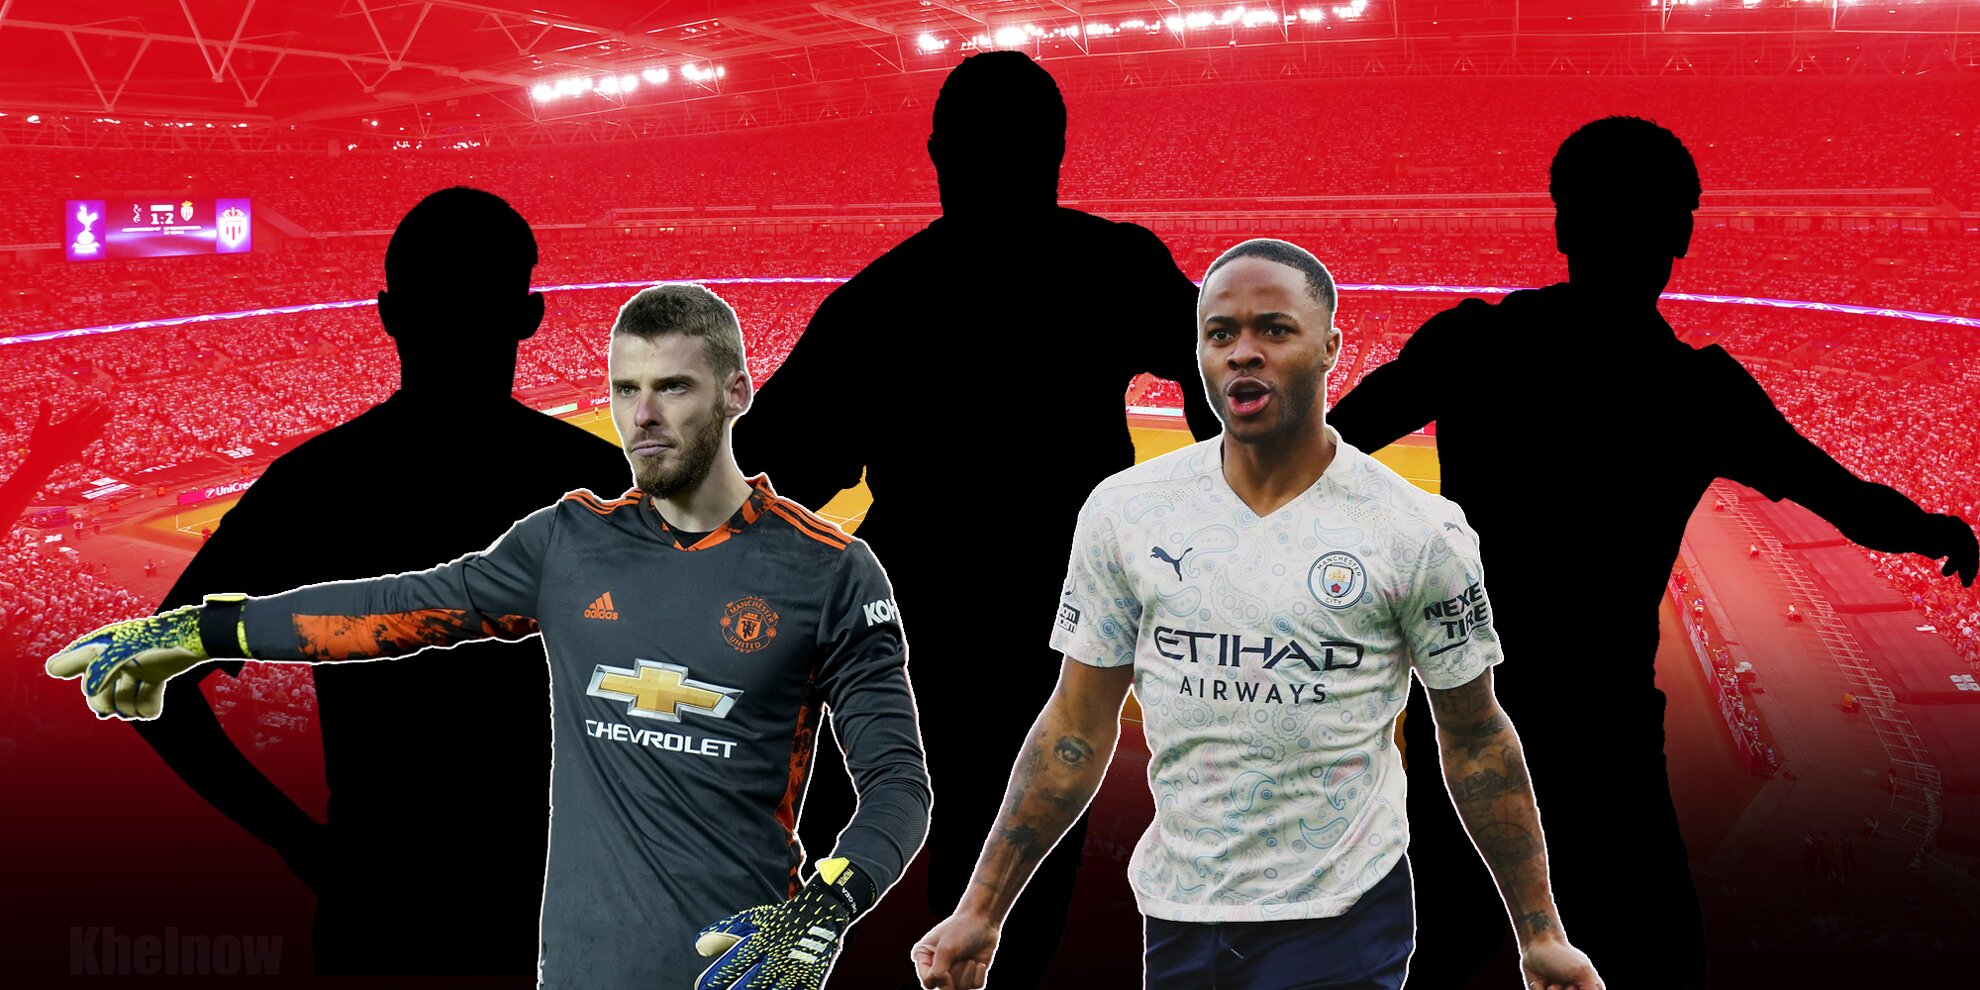 Top five highest paid footballers in the Premier League in 2021